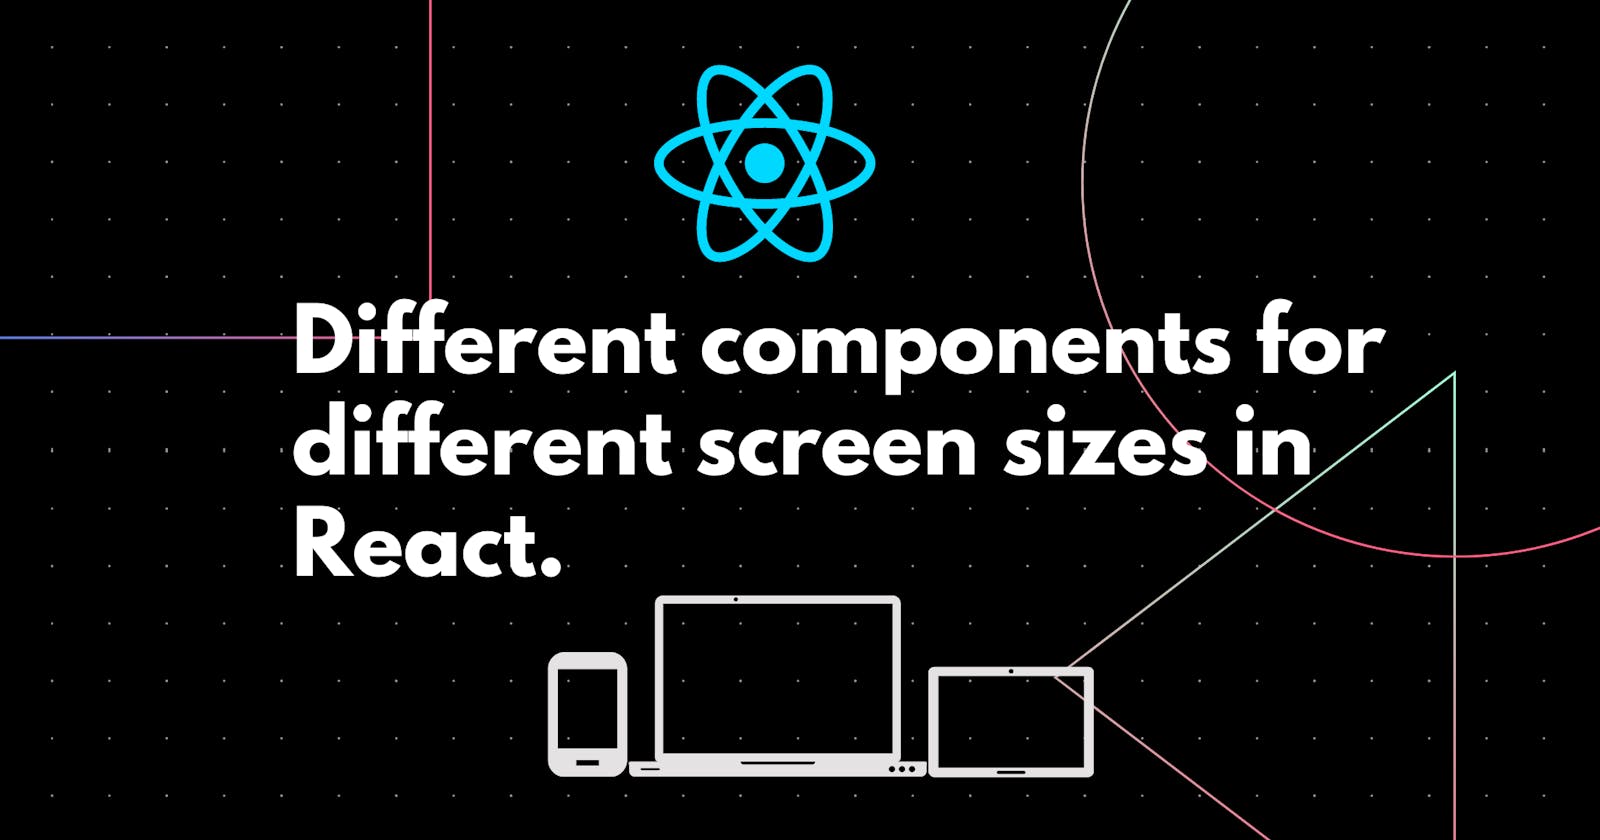 Different components for different screen sizes in React using Material-UI.